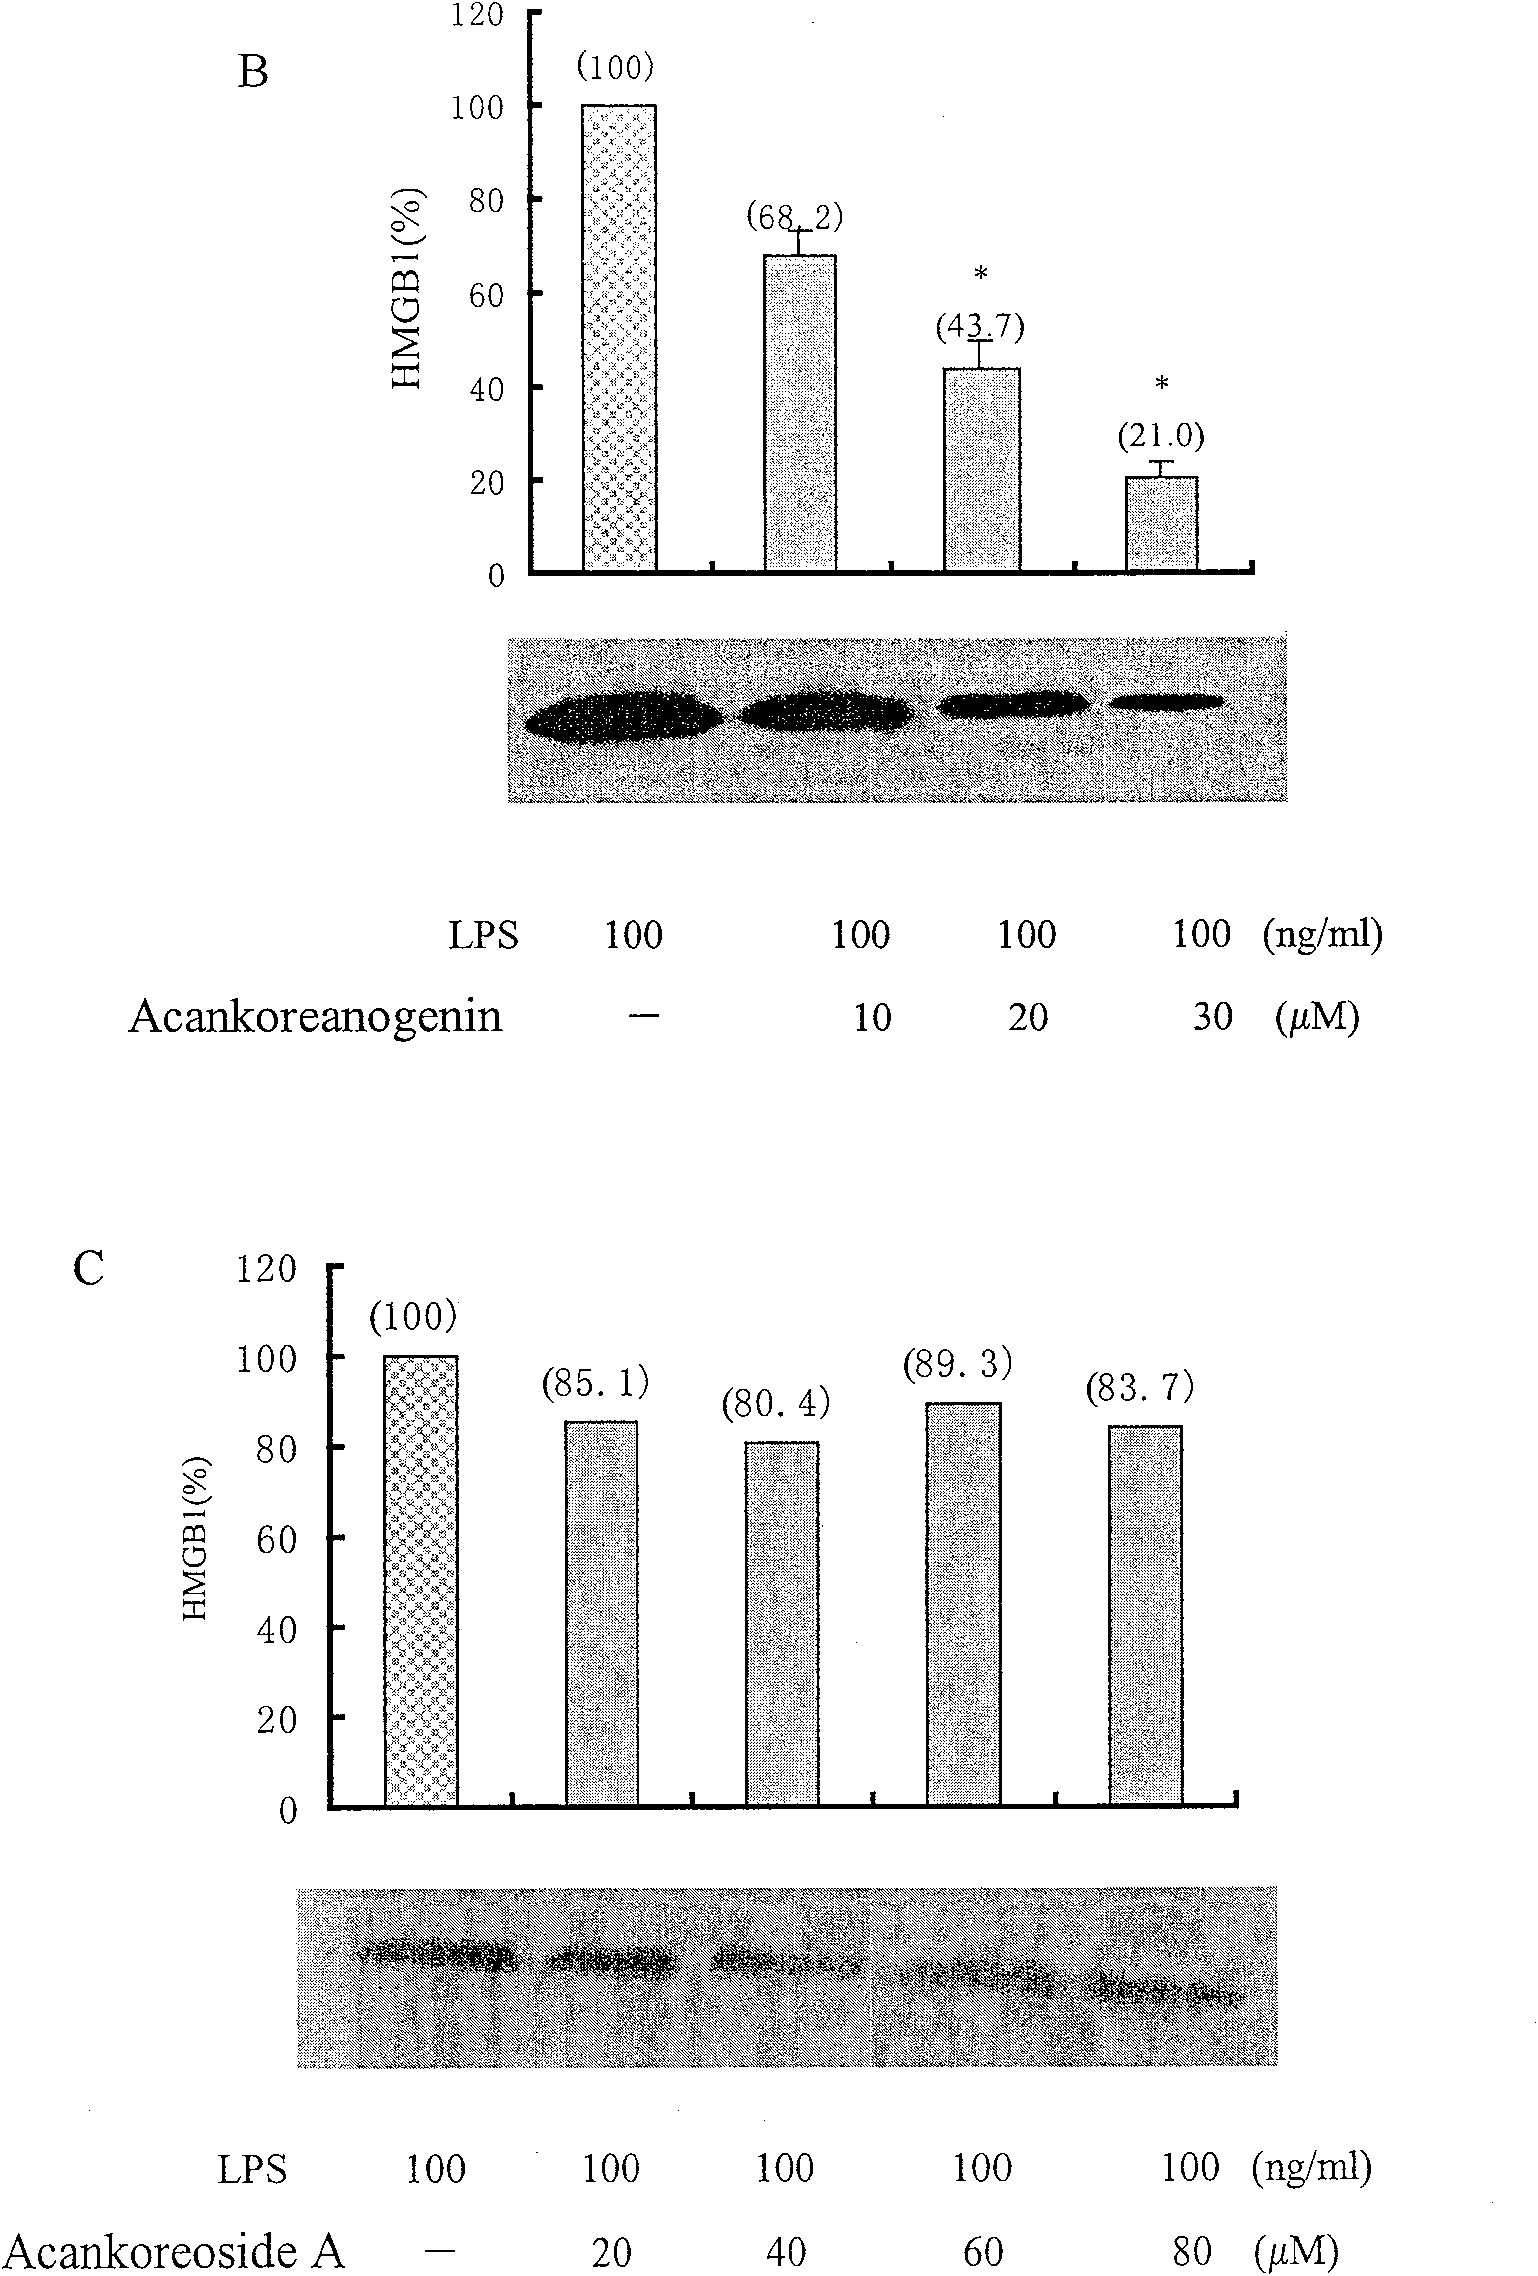 Usage of eleutheroside with anti-inflammatory action or aglycone thereof